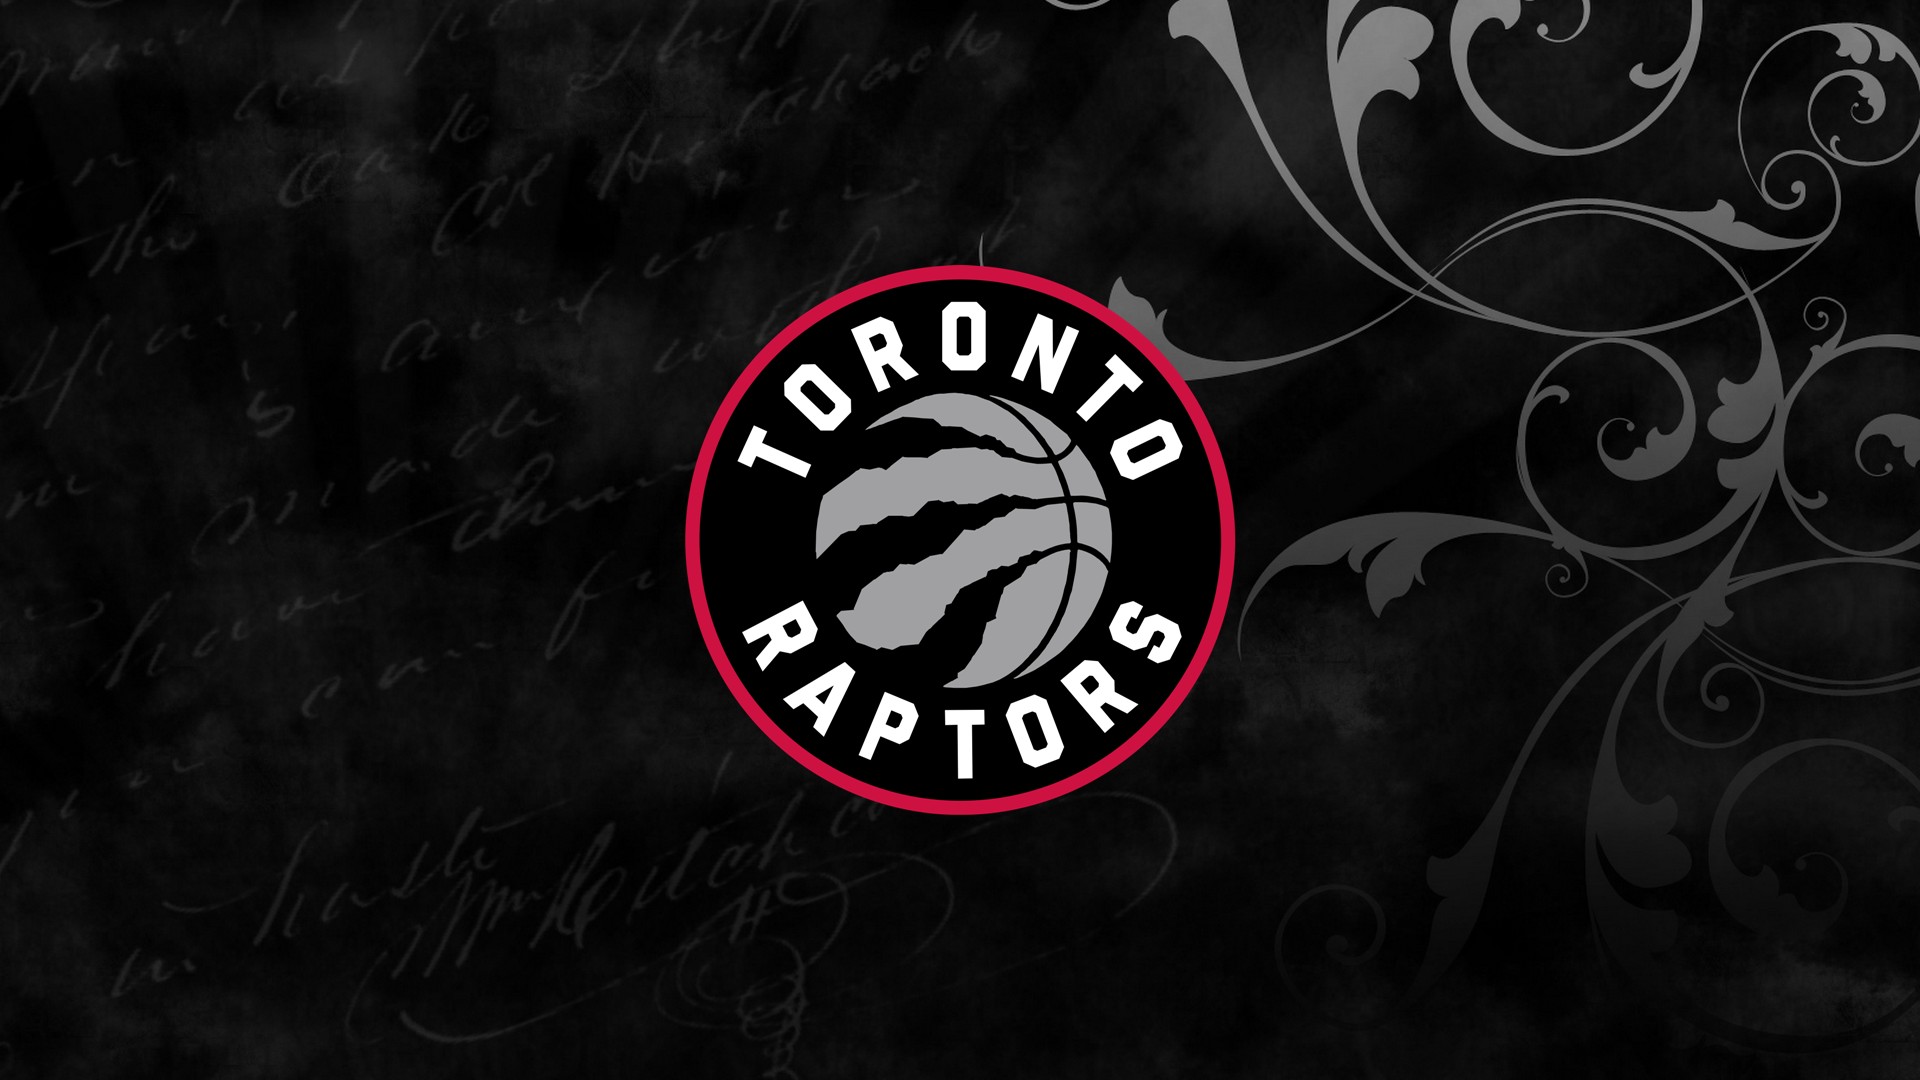 NBA Raptors Desktop Wallpapers with image dimensions 1920x1080 pixel. You can make this wallpaper for your Desktop Computer Backgrounds, Windows or Mac Screensavers, iPhone Lock screen, Tablet or Android and another Mobile Phone device